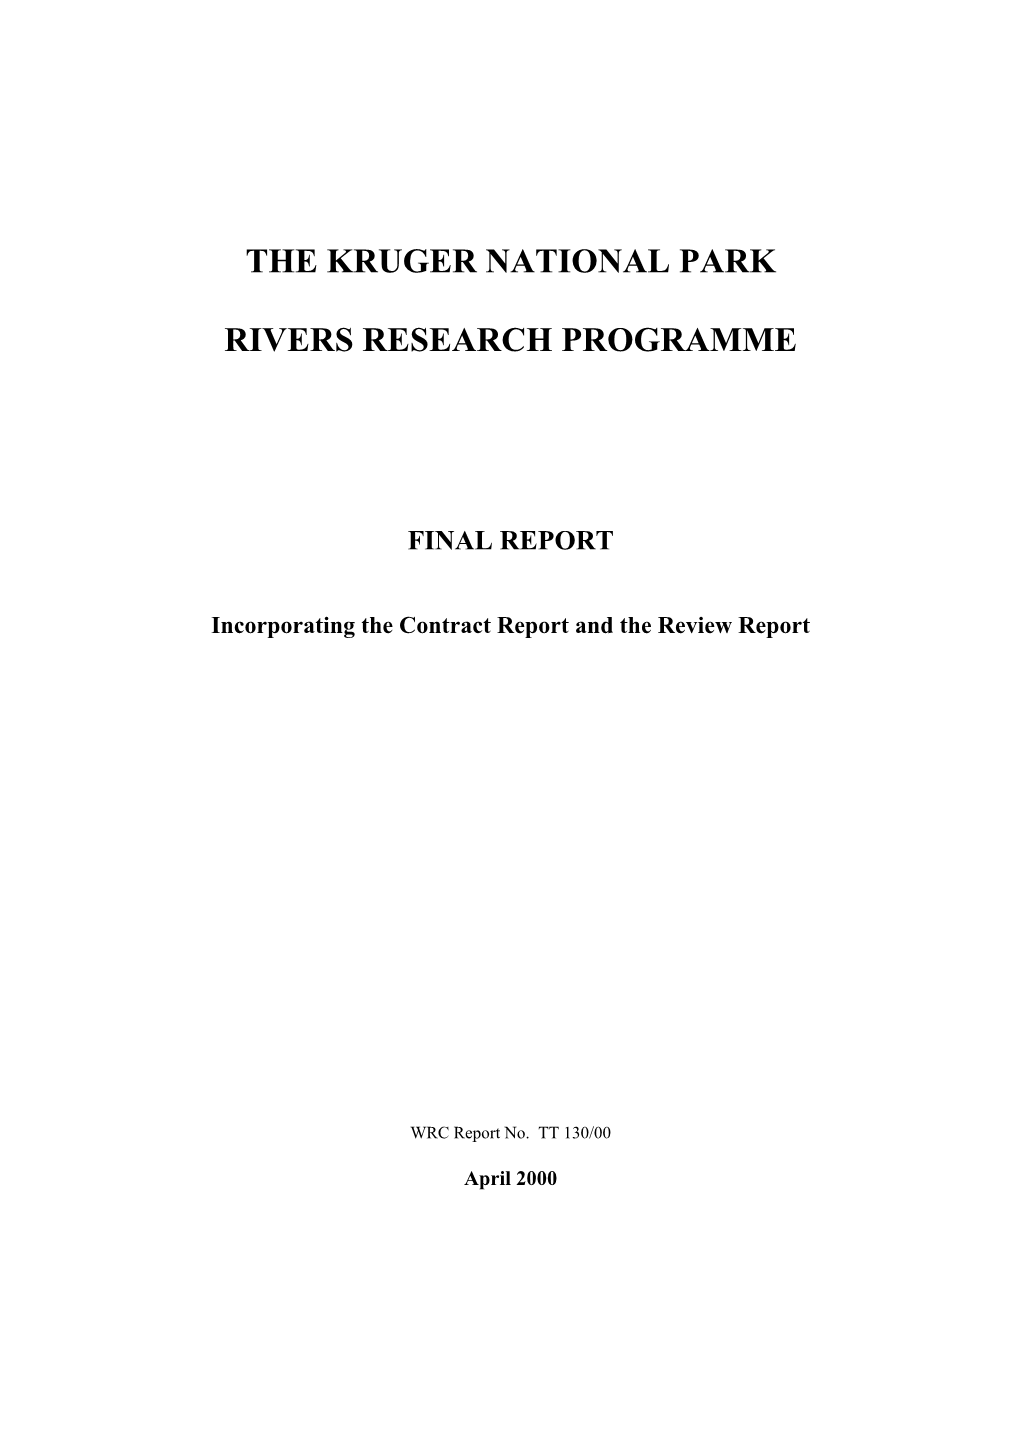 The Kruger National Park Rivers Research Programme (Knprrp)